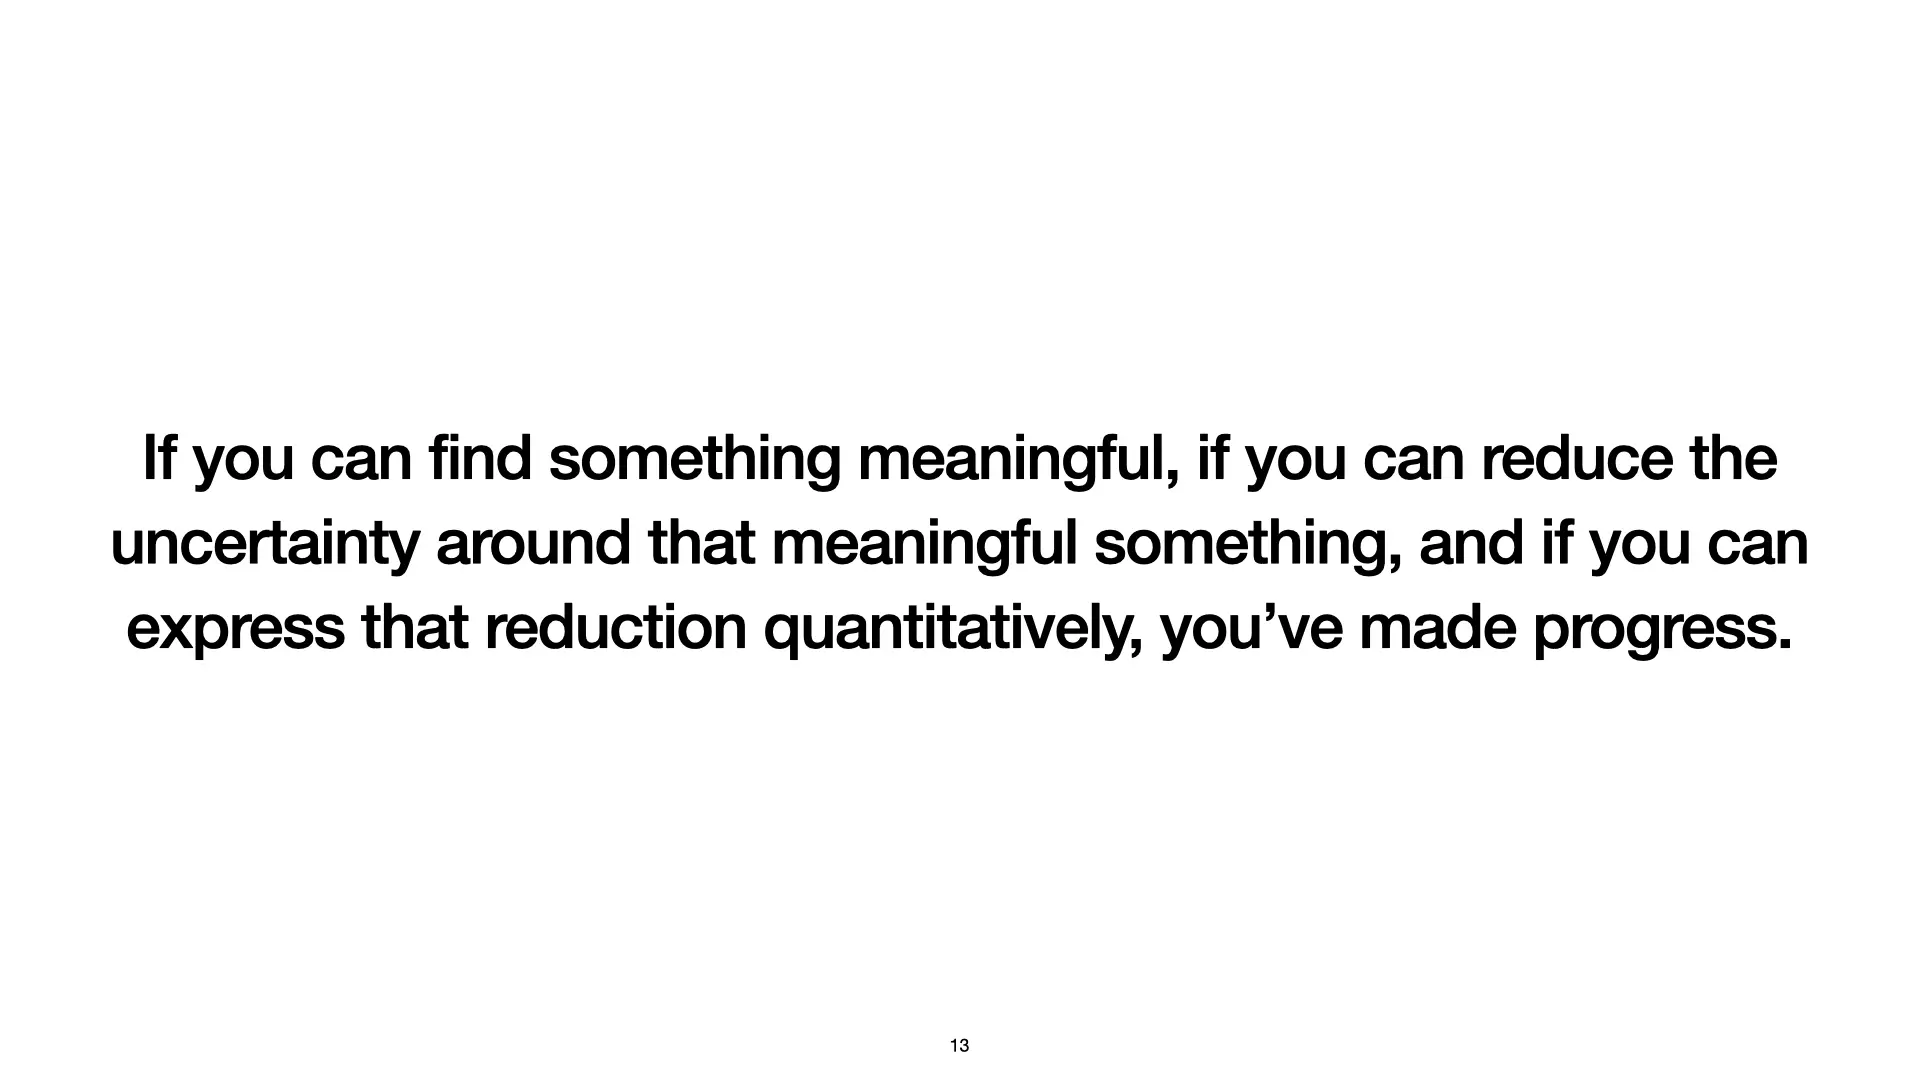 Slide 13: Conclusion: If you can find something meaningful, if you can reduce the uncertainty around that meaningful something, and if you can express that reduction quantitatively, you’ve made progress.